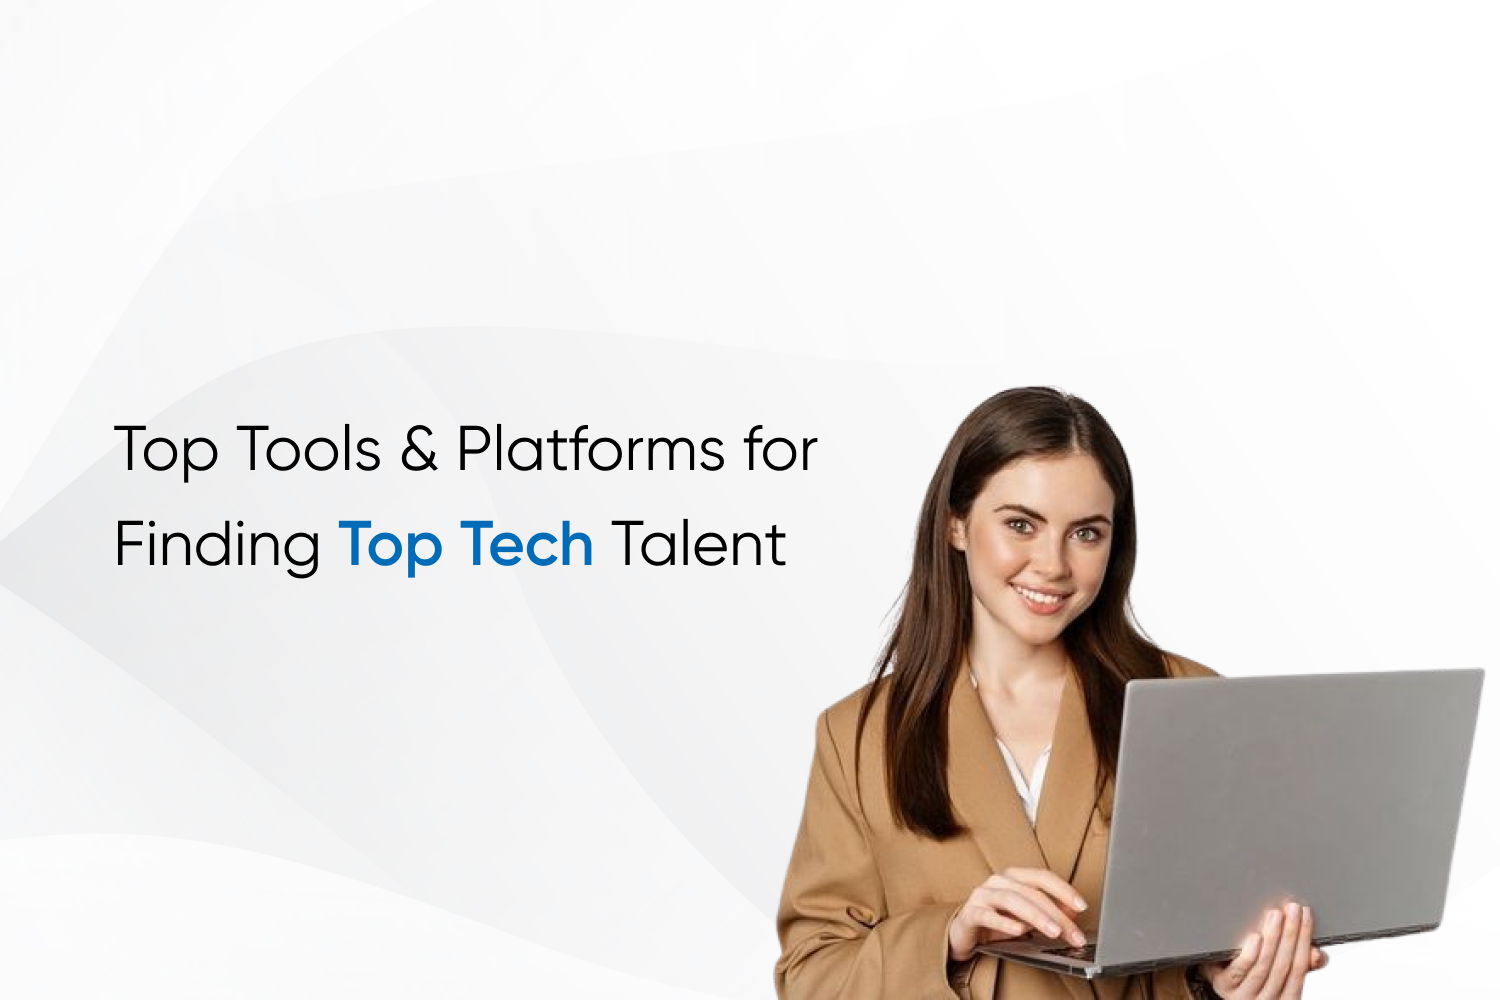 Top Tools & Platforms for Finding Top Tech Talent